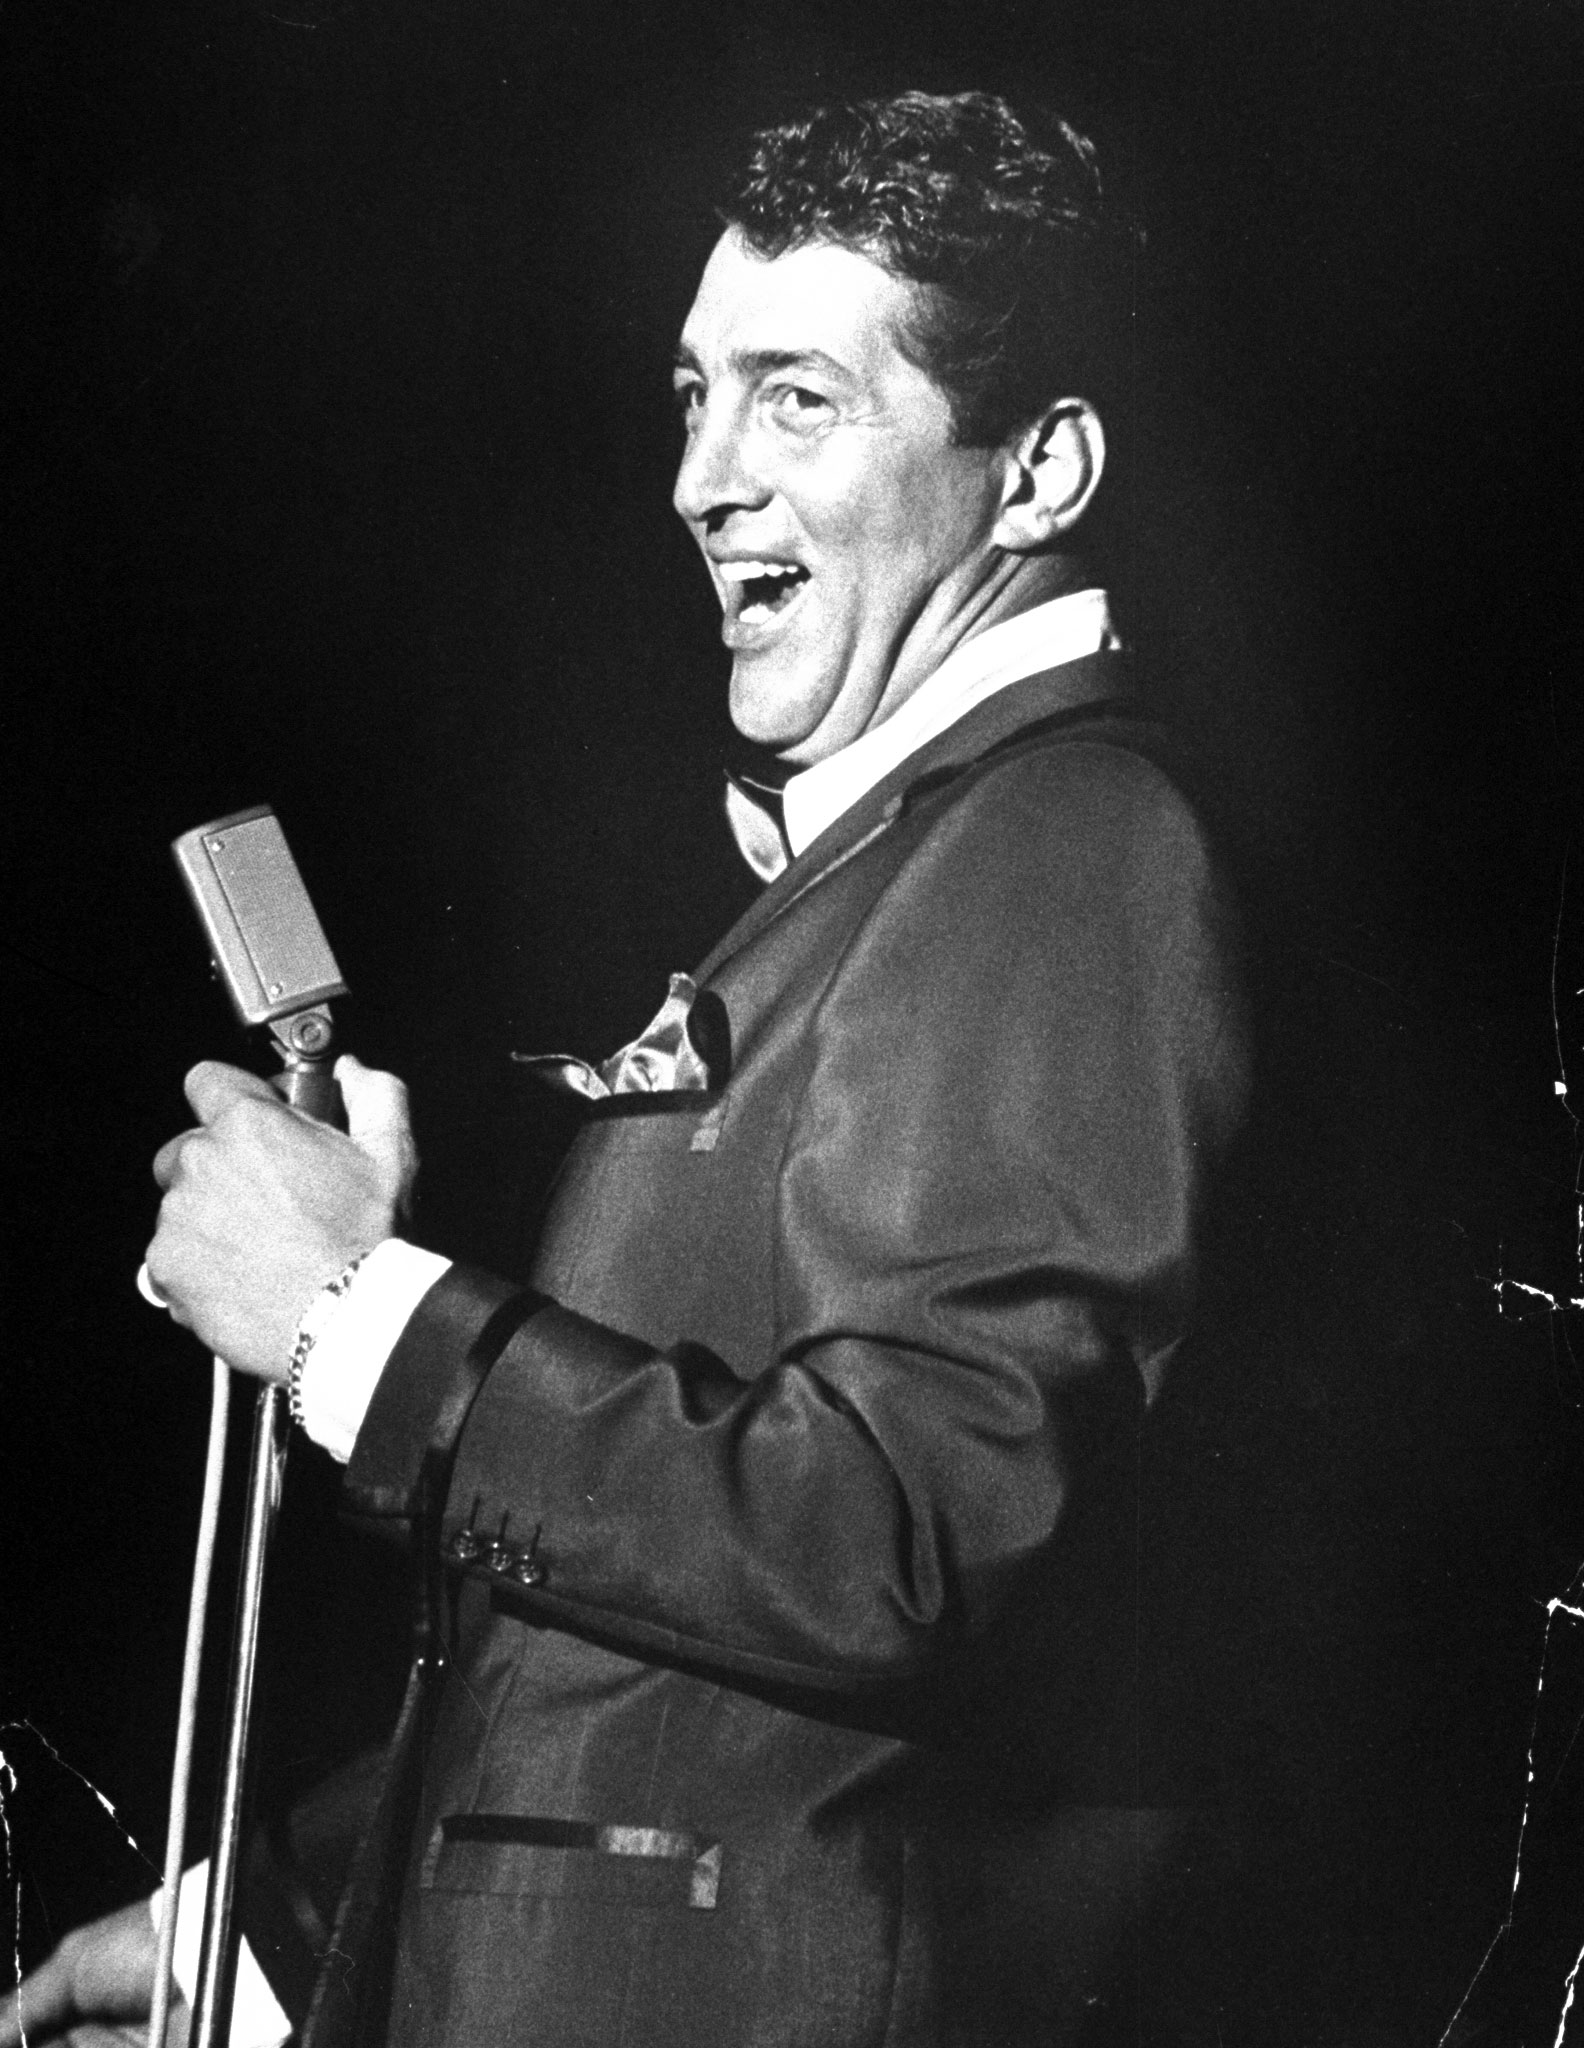 Dean Martin performing at the Sands Hotel in 1958